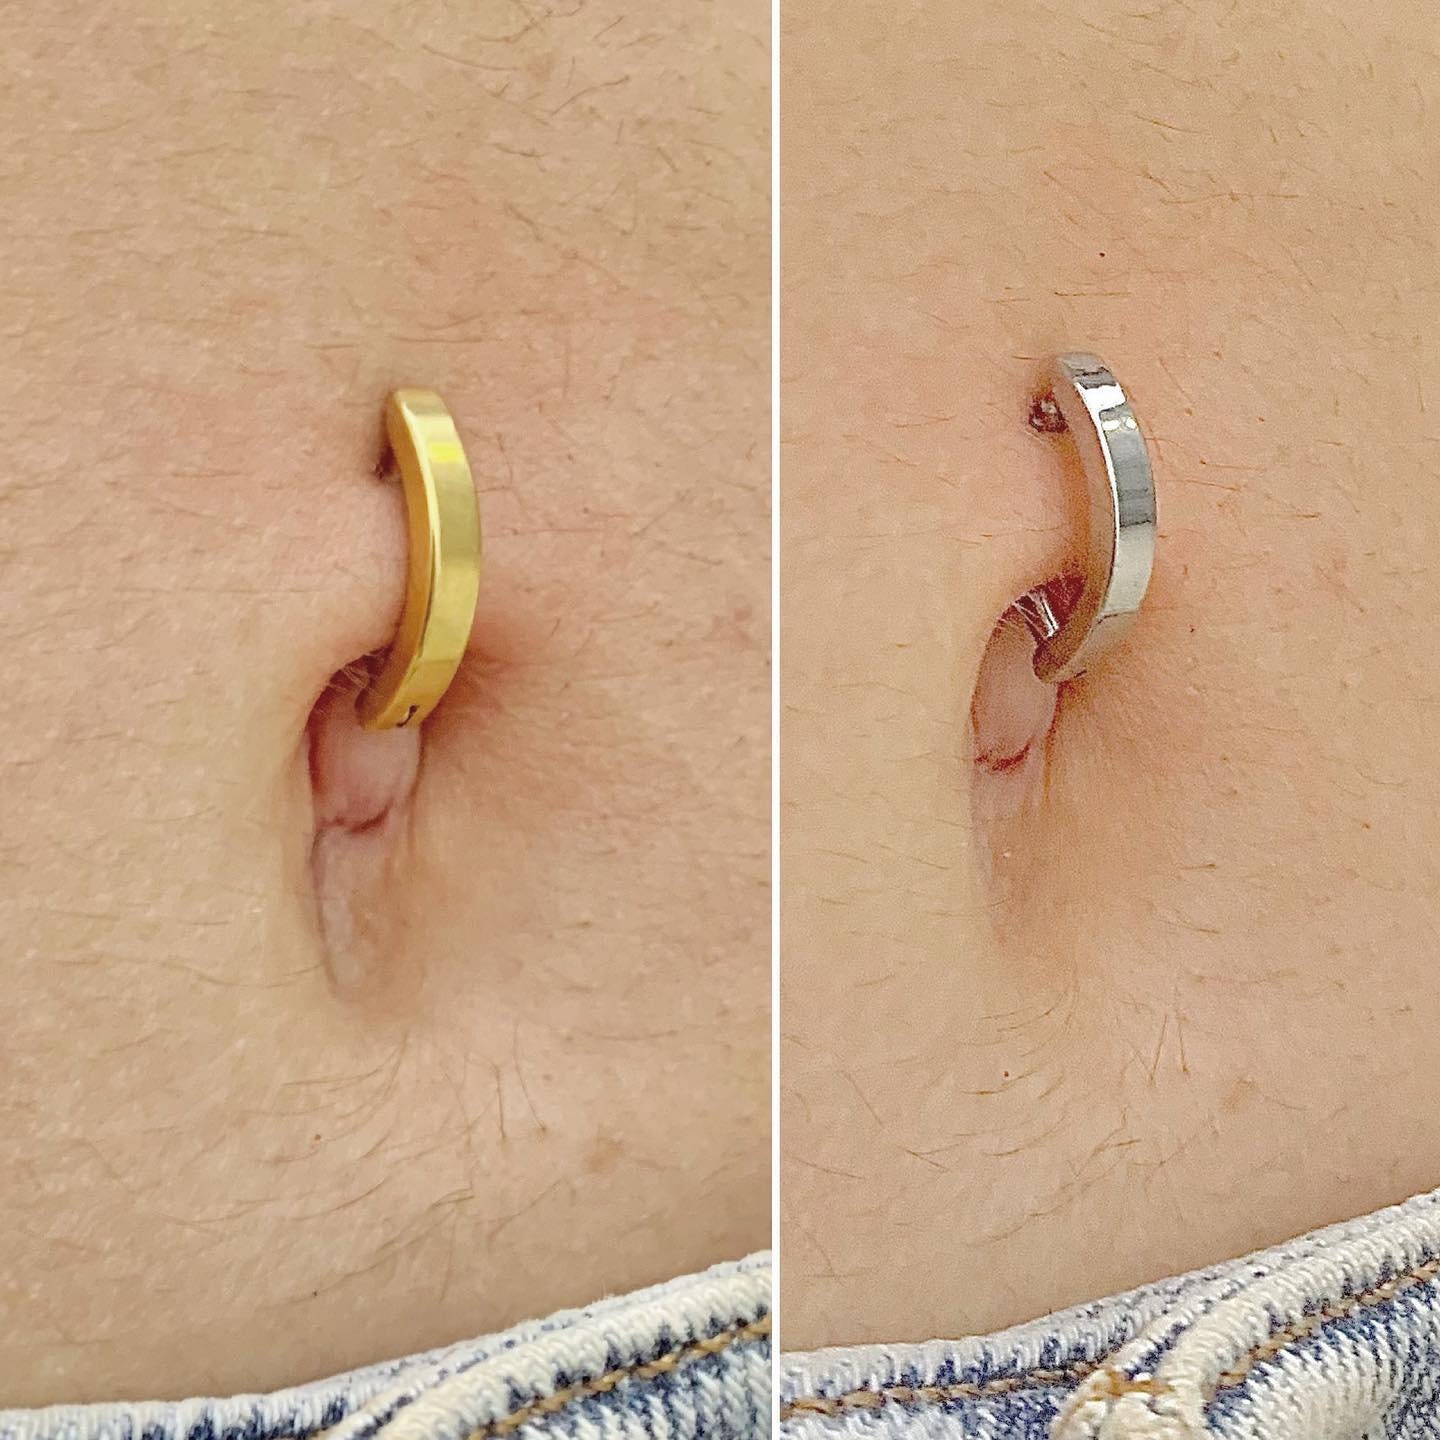 5 Different Types Of Belly Button Piercings You Should Consider & The  Details To Know